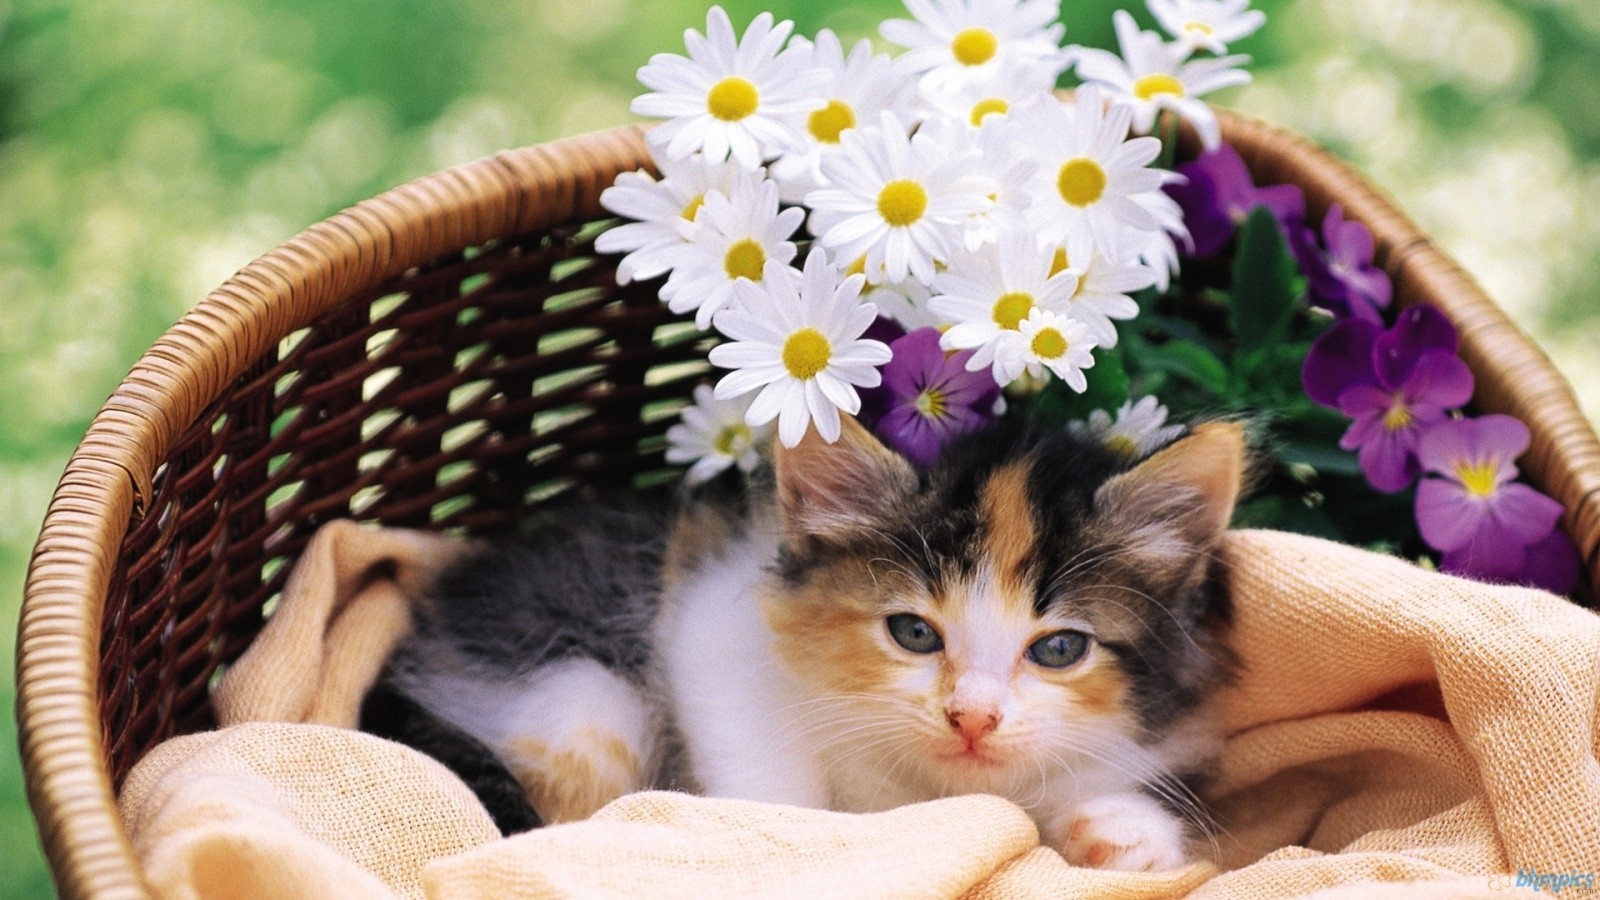 Cat And Flower In Basket Wallpaper Hq